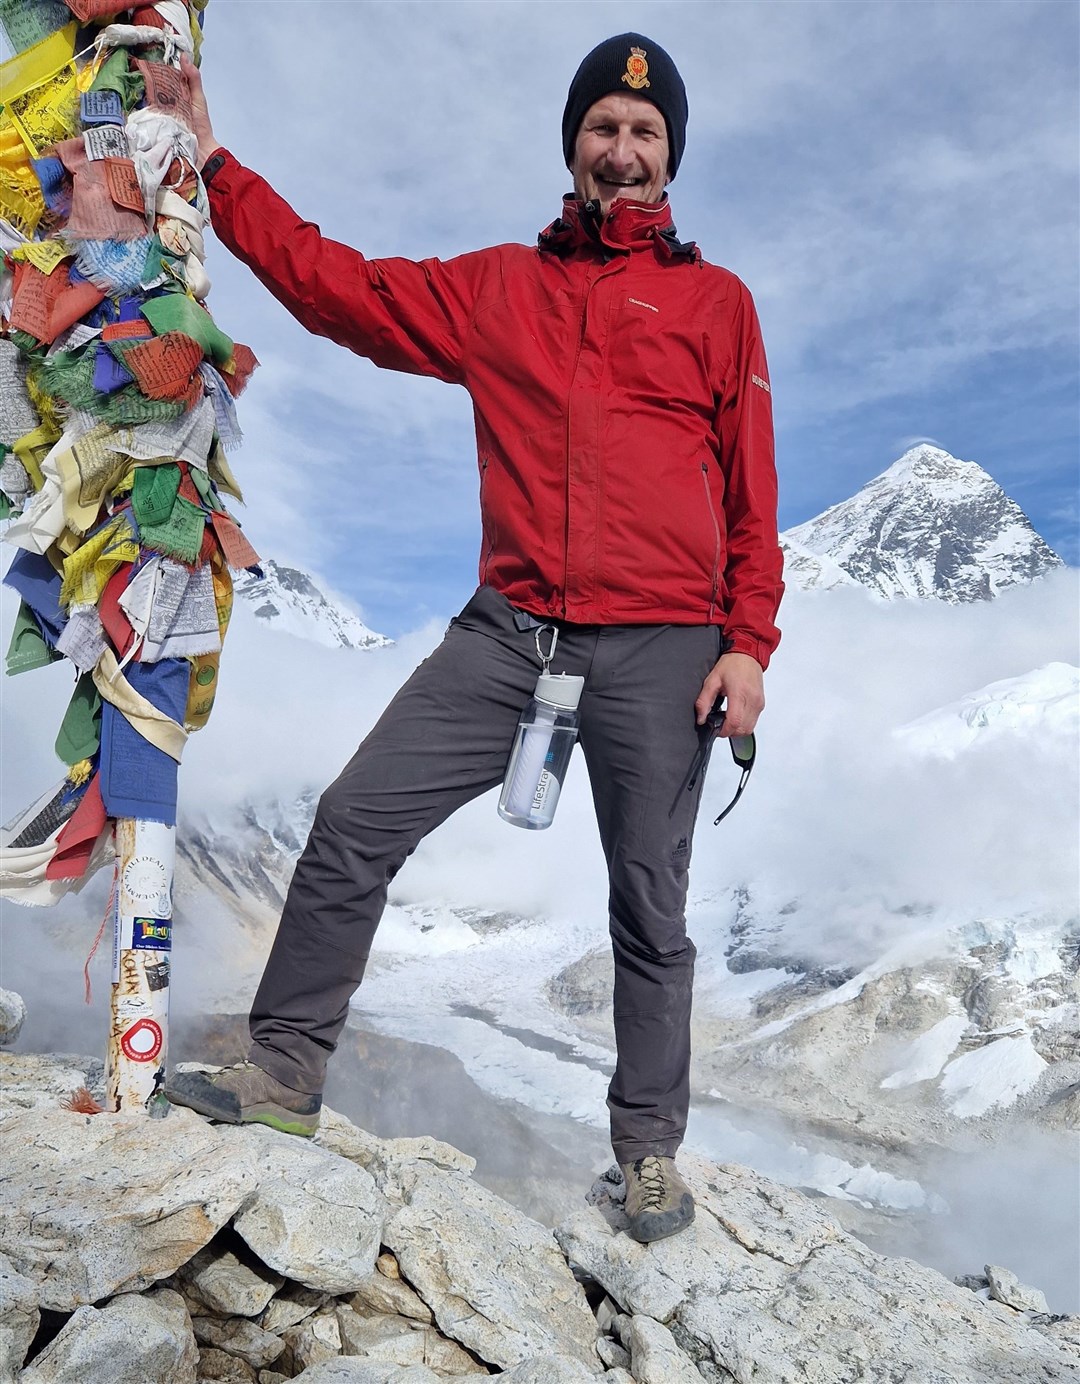 Stephen Wiltshire at the 5643 meter summit of Kala Patthar, with Everest over his left shoulder.